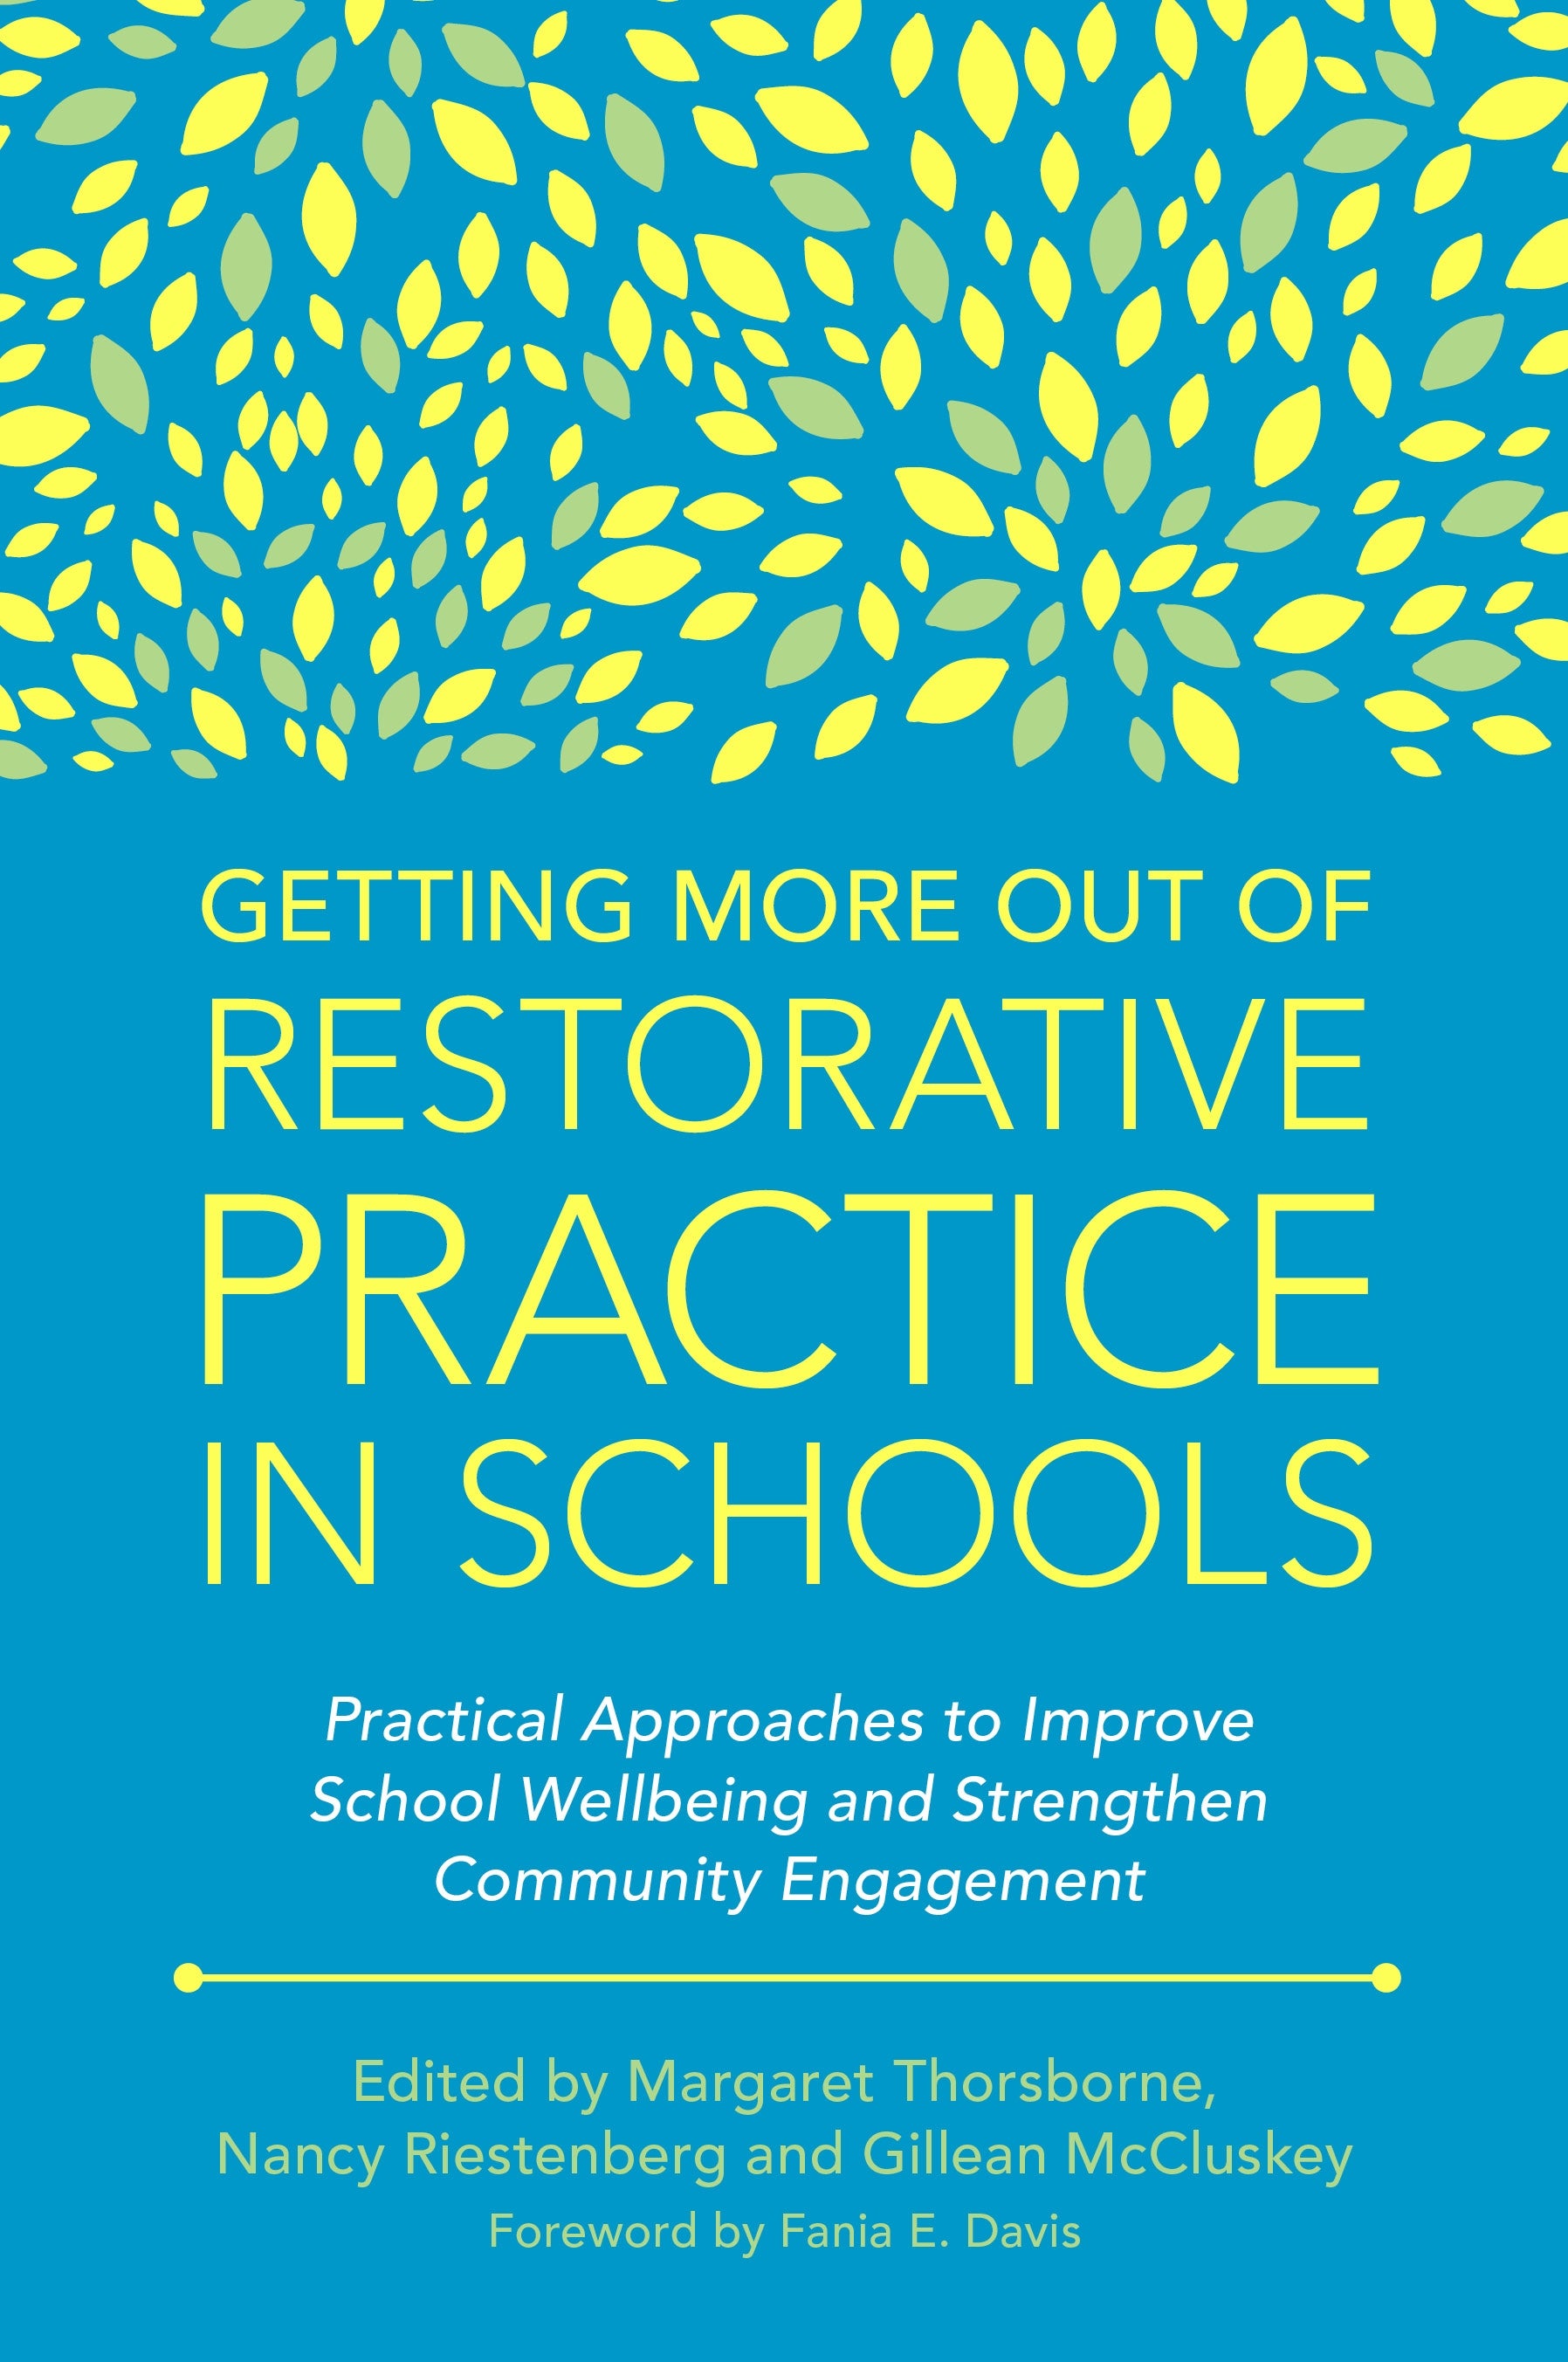 Getting More Out of Restorative Practice in Schools by Margaret Thorsborne, Nancy Riestenberg, Gillean McCluskey, No Author Listed, Fania Davis